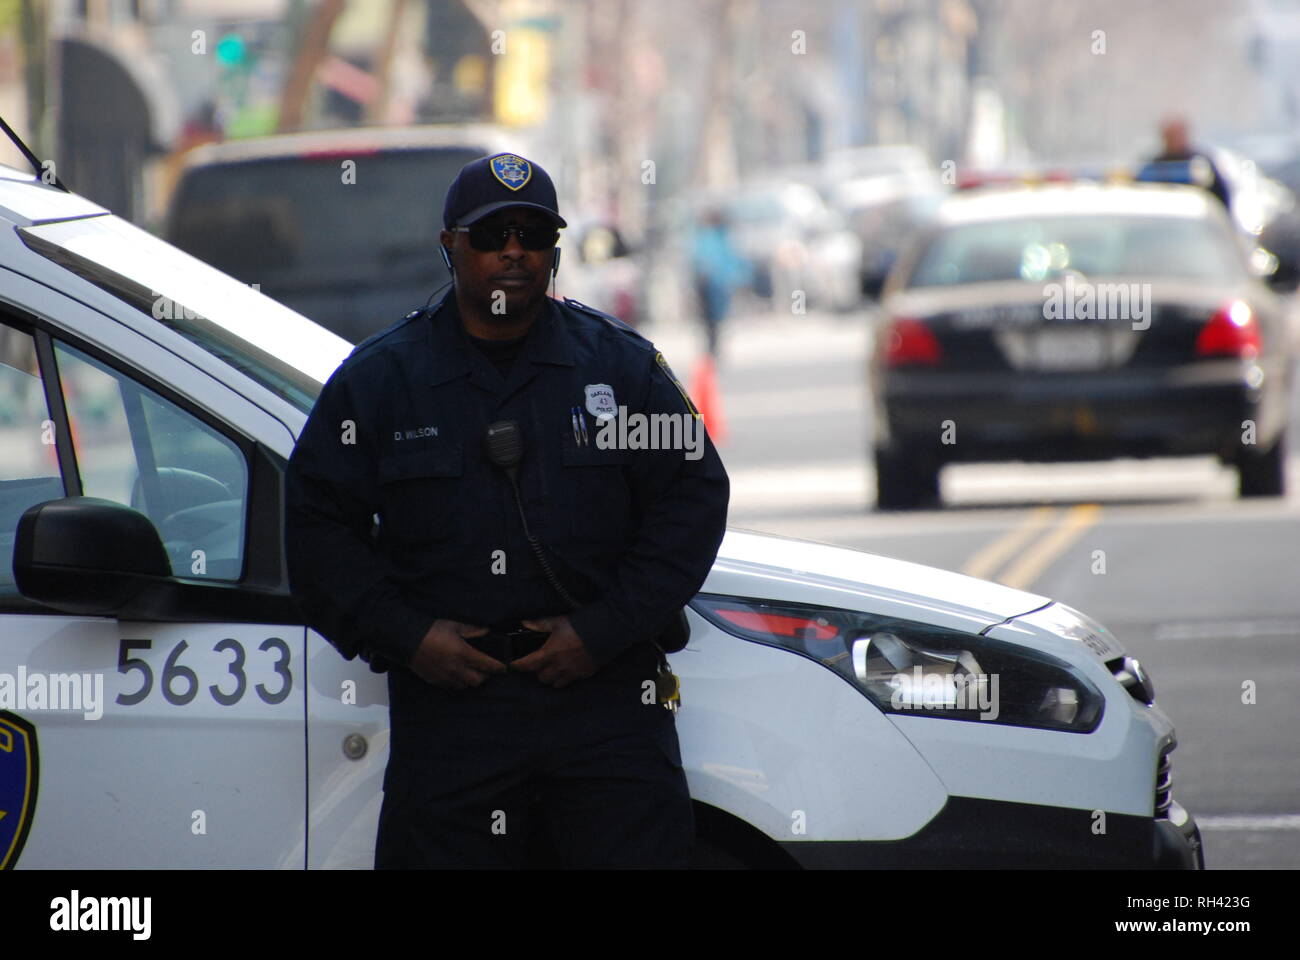 Oakland police Cadet D. Wilson providing security outside a Kamala Harris for President rally in downtown Oakland on Jan. 27, 2019. Stock Photo